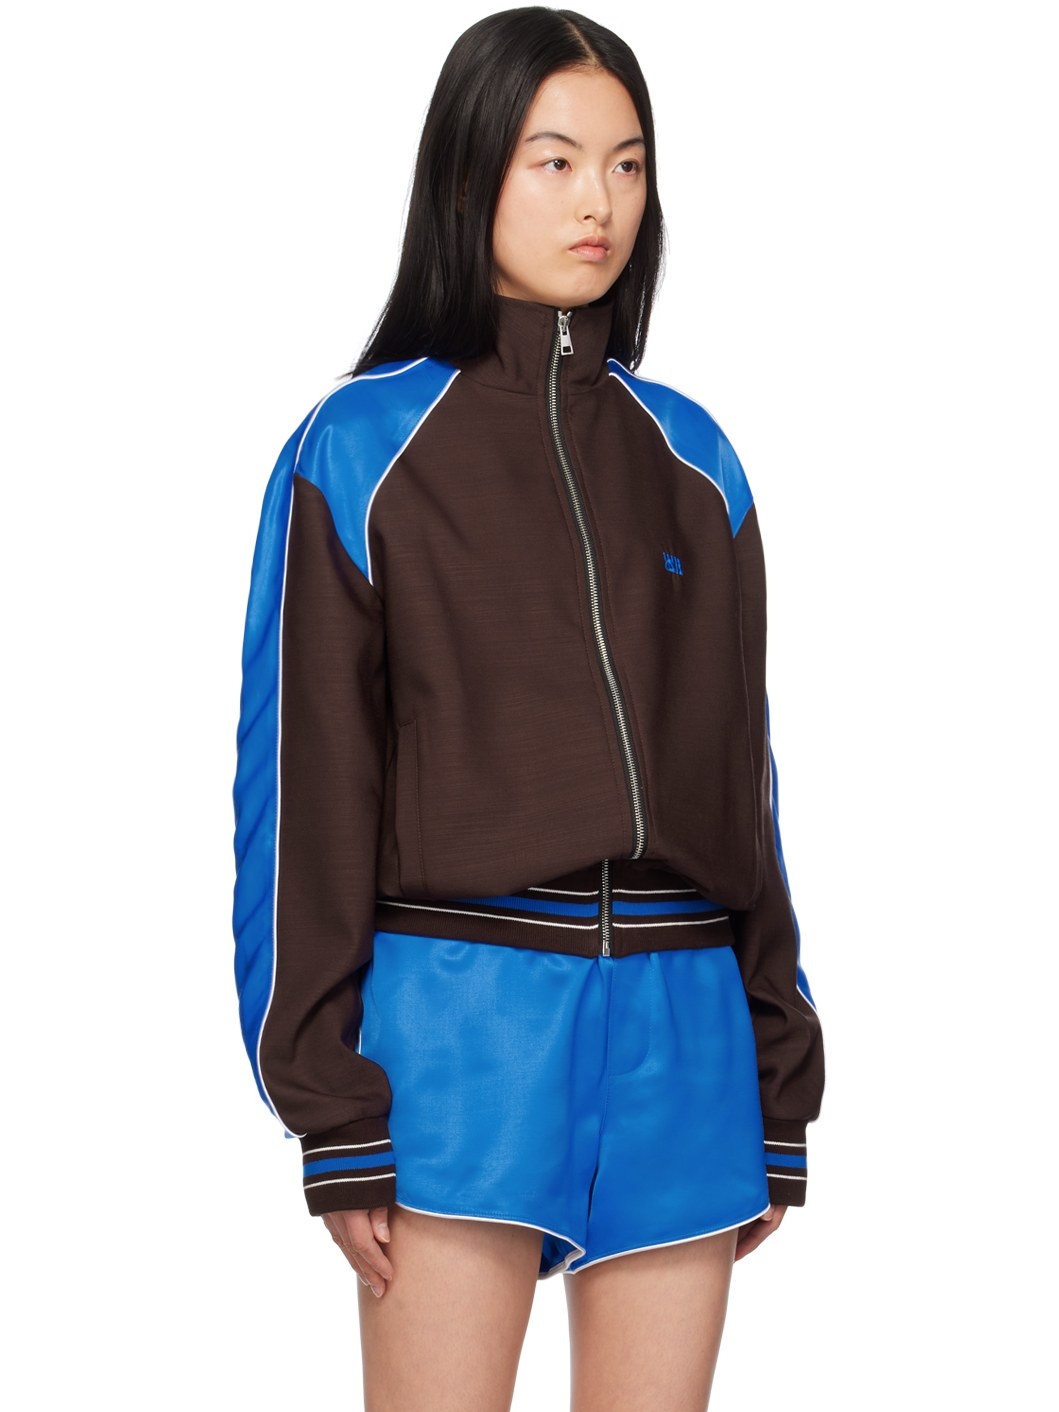 Brown & Blue Courage Track Jacket - 2